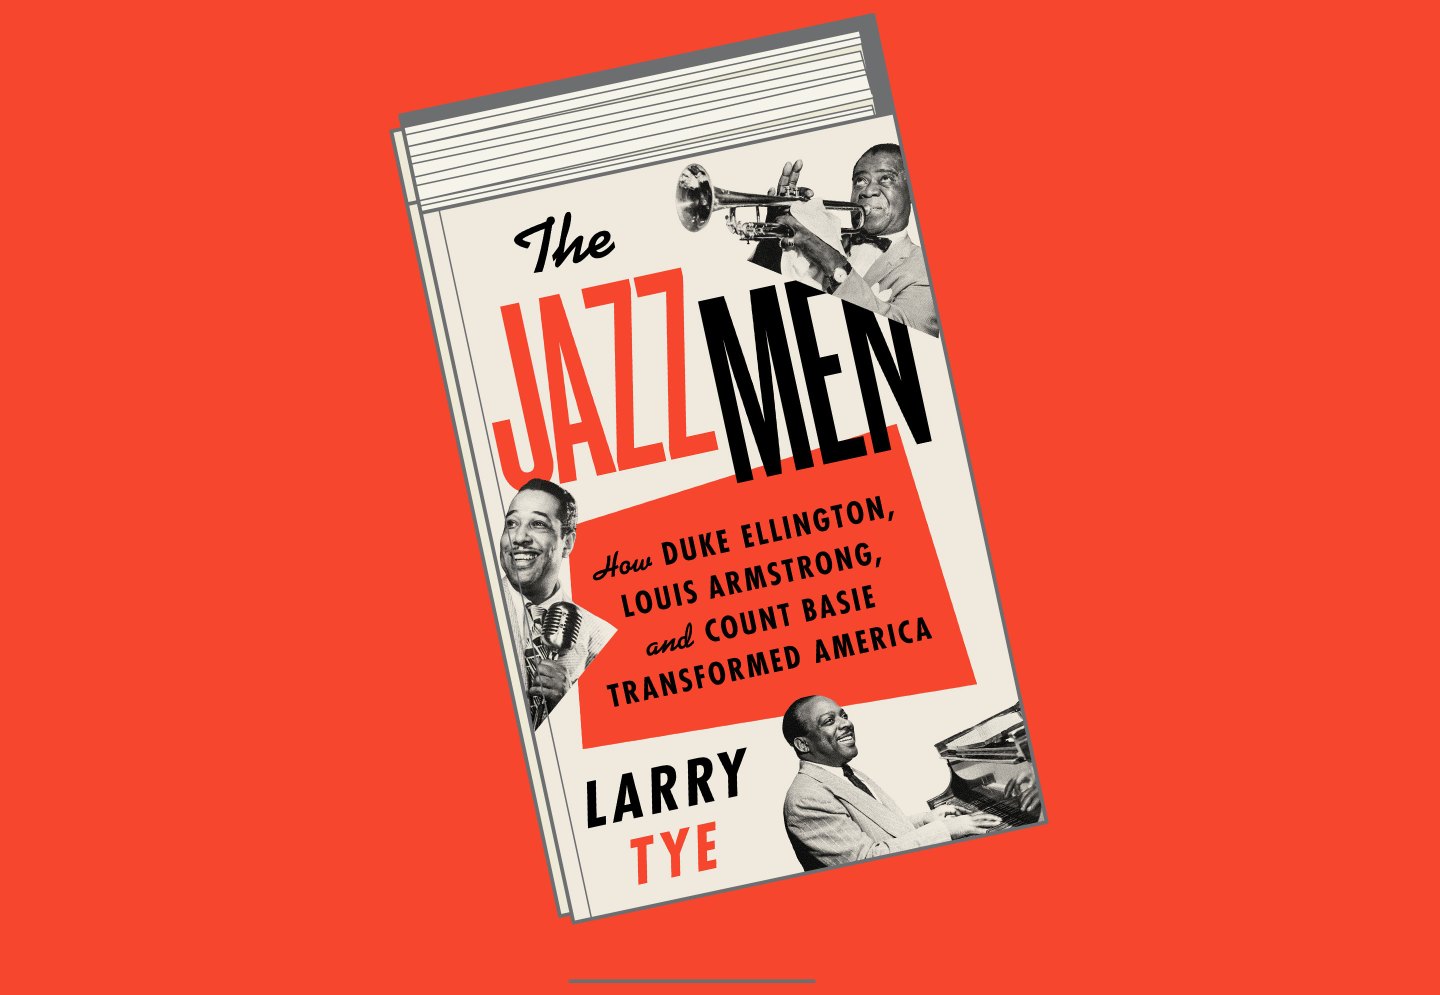 &#8220;The Jazzmen: How Duke Ellington, Louis Armstrong, and Count Basie Transformed America&#8221; By Larry Tye